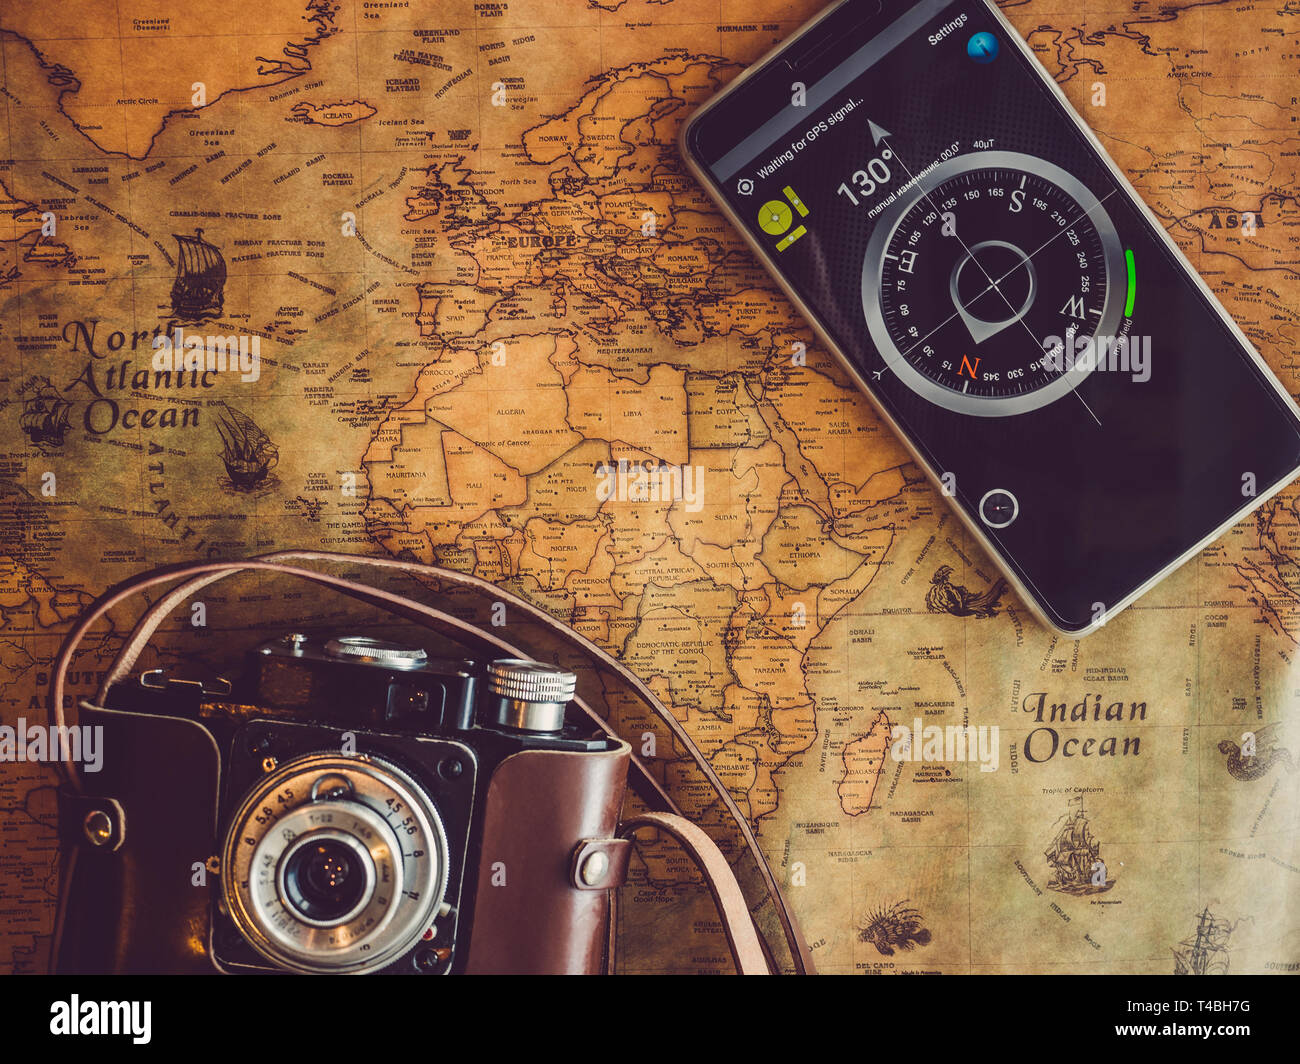 mobile phone compass